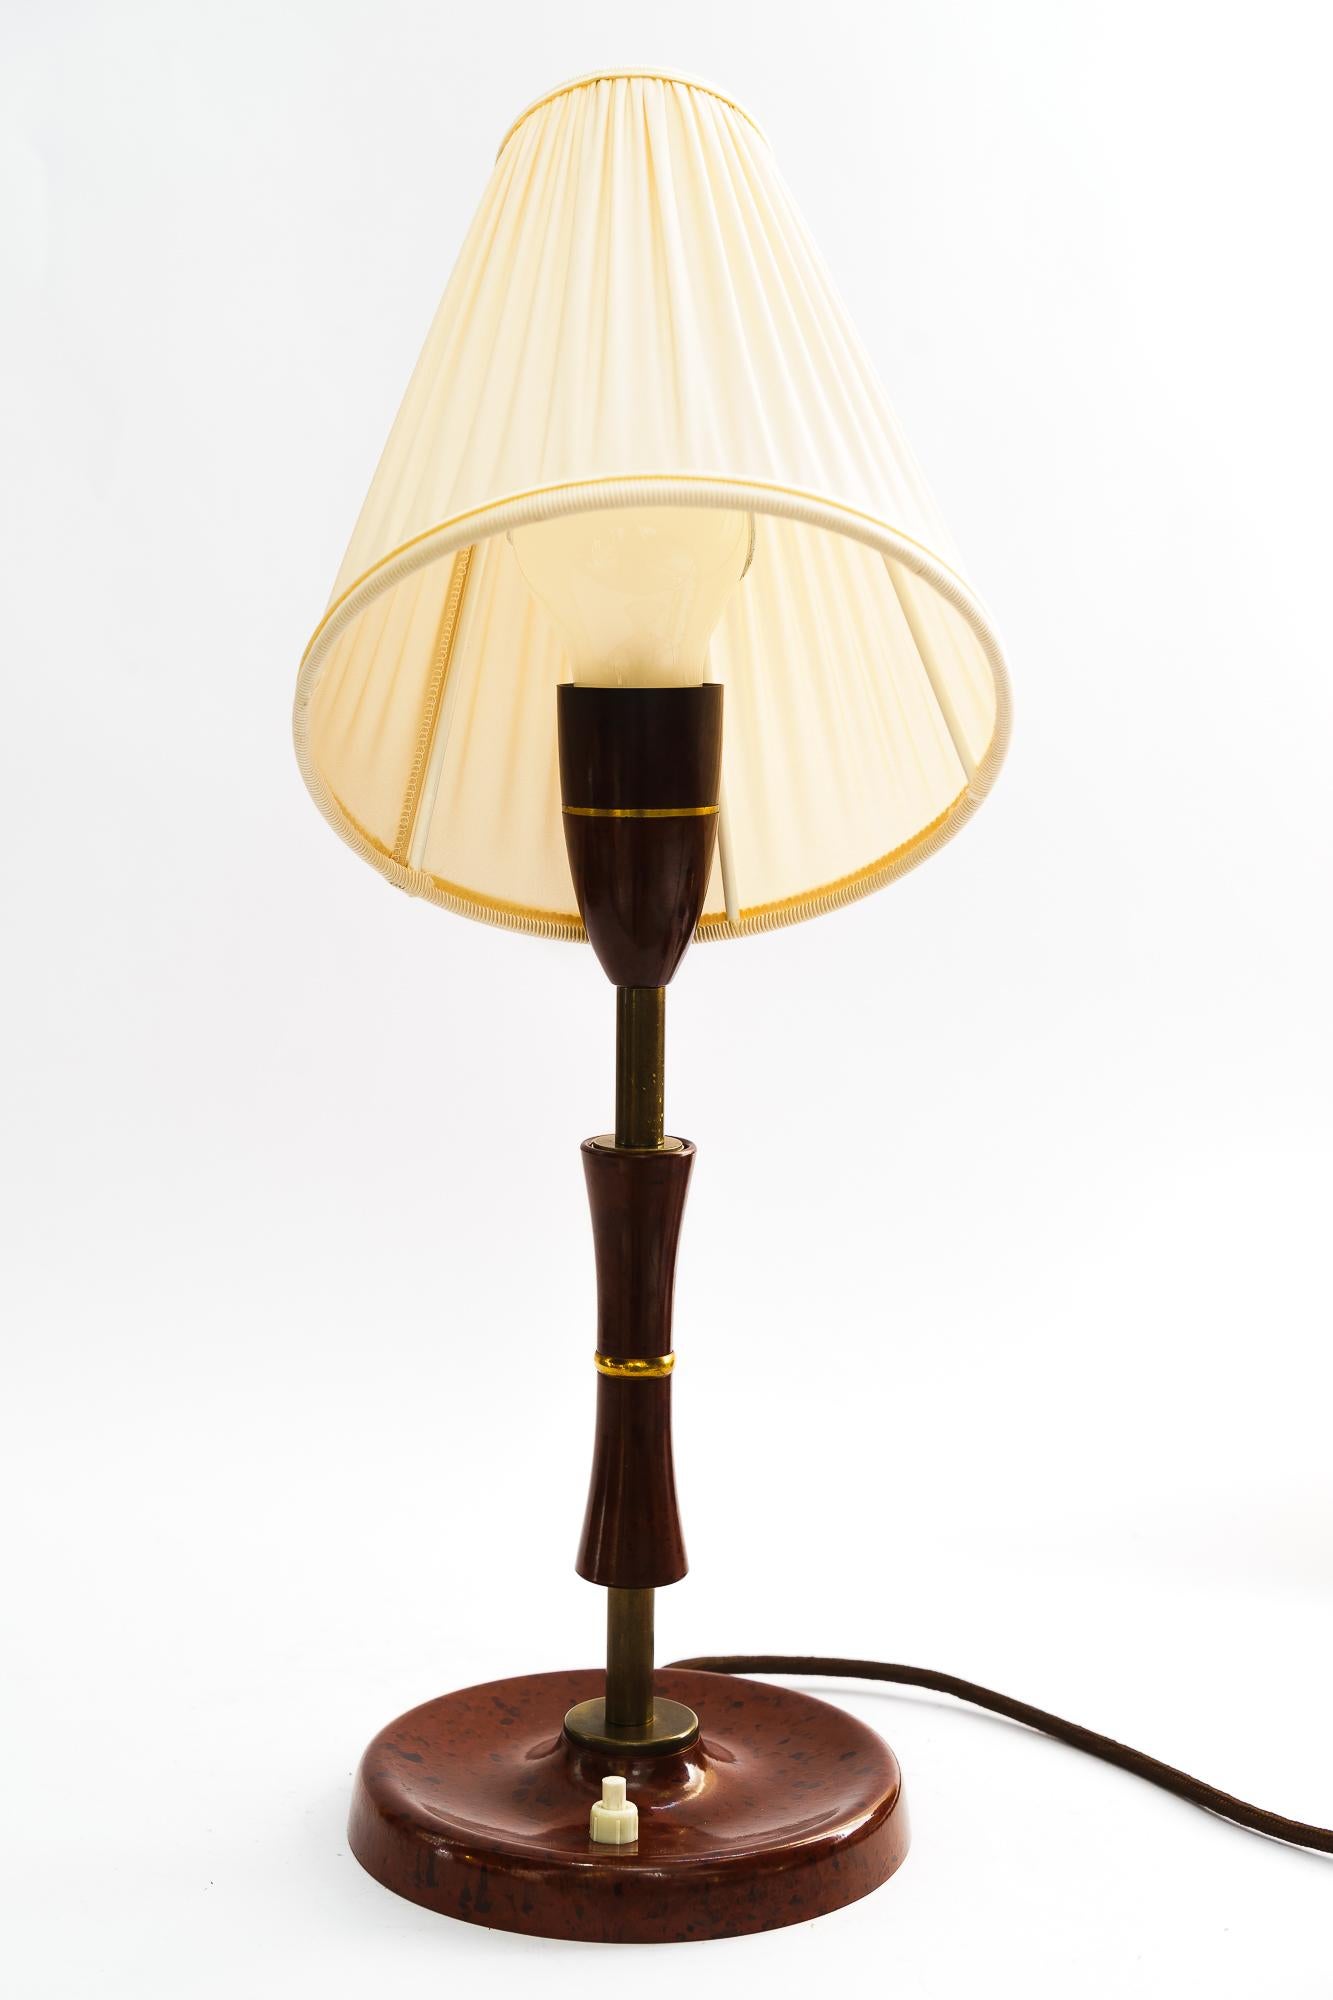 Bakelite Table Lamp Vienna with Fabric Shade Around 1930s
Original condition
The fabric shade is replaced ( new )